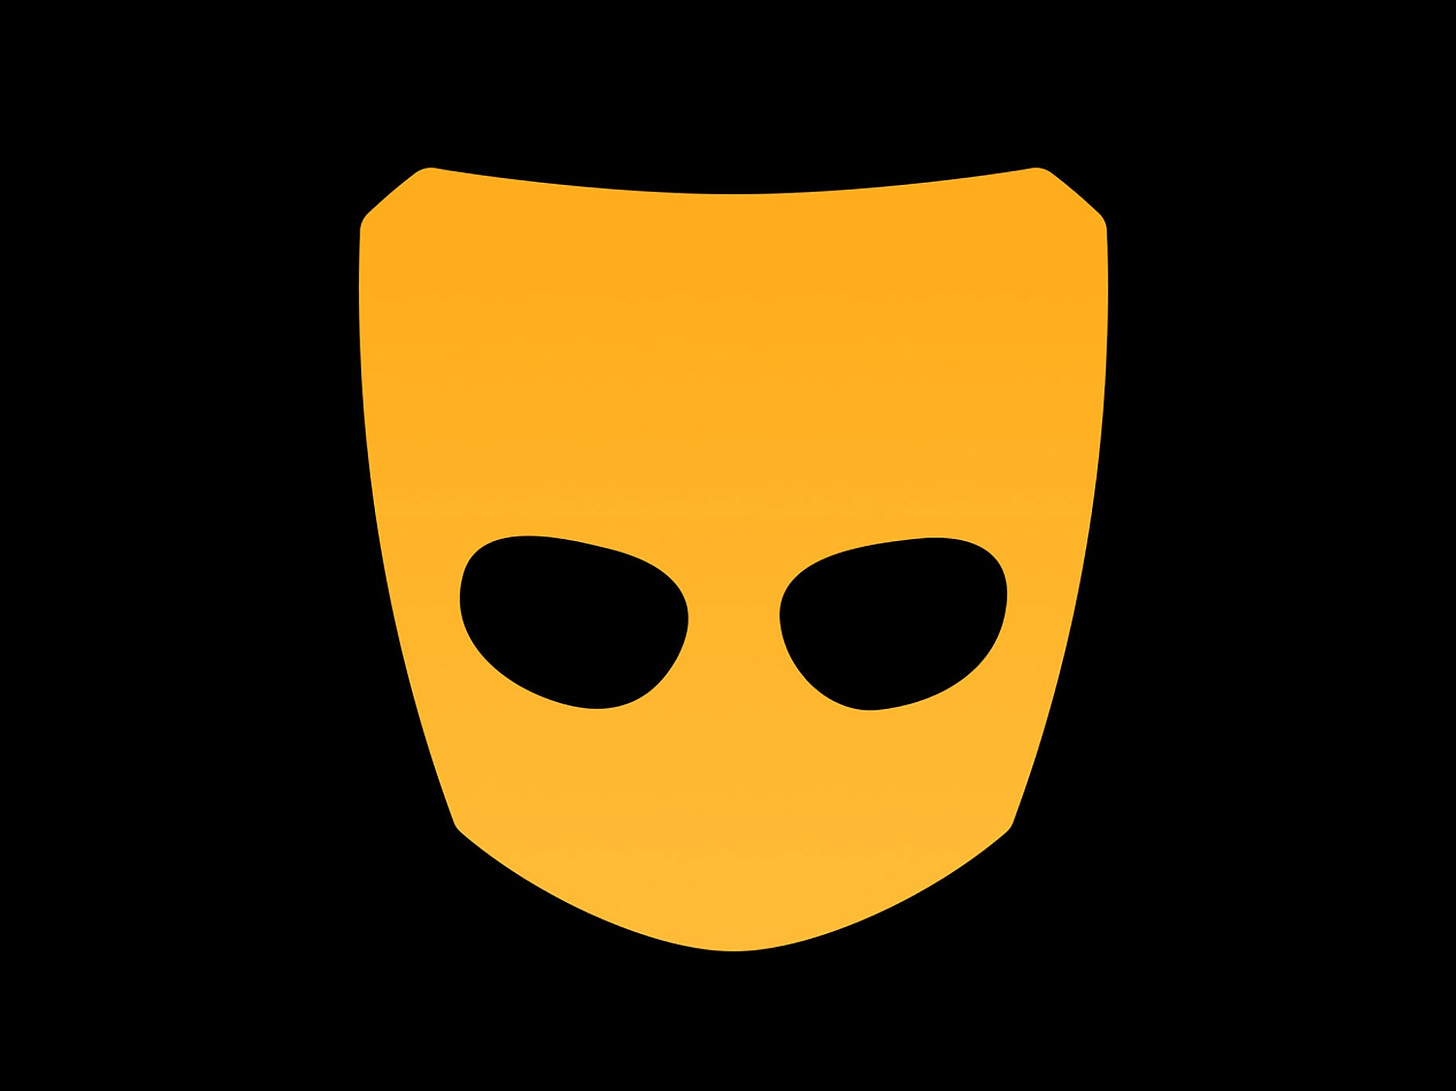 Spoofed Grindr Accounts Turned One Man's Life Into a 'Living Hell' | WIRED